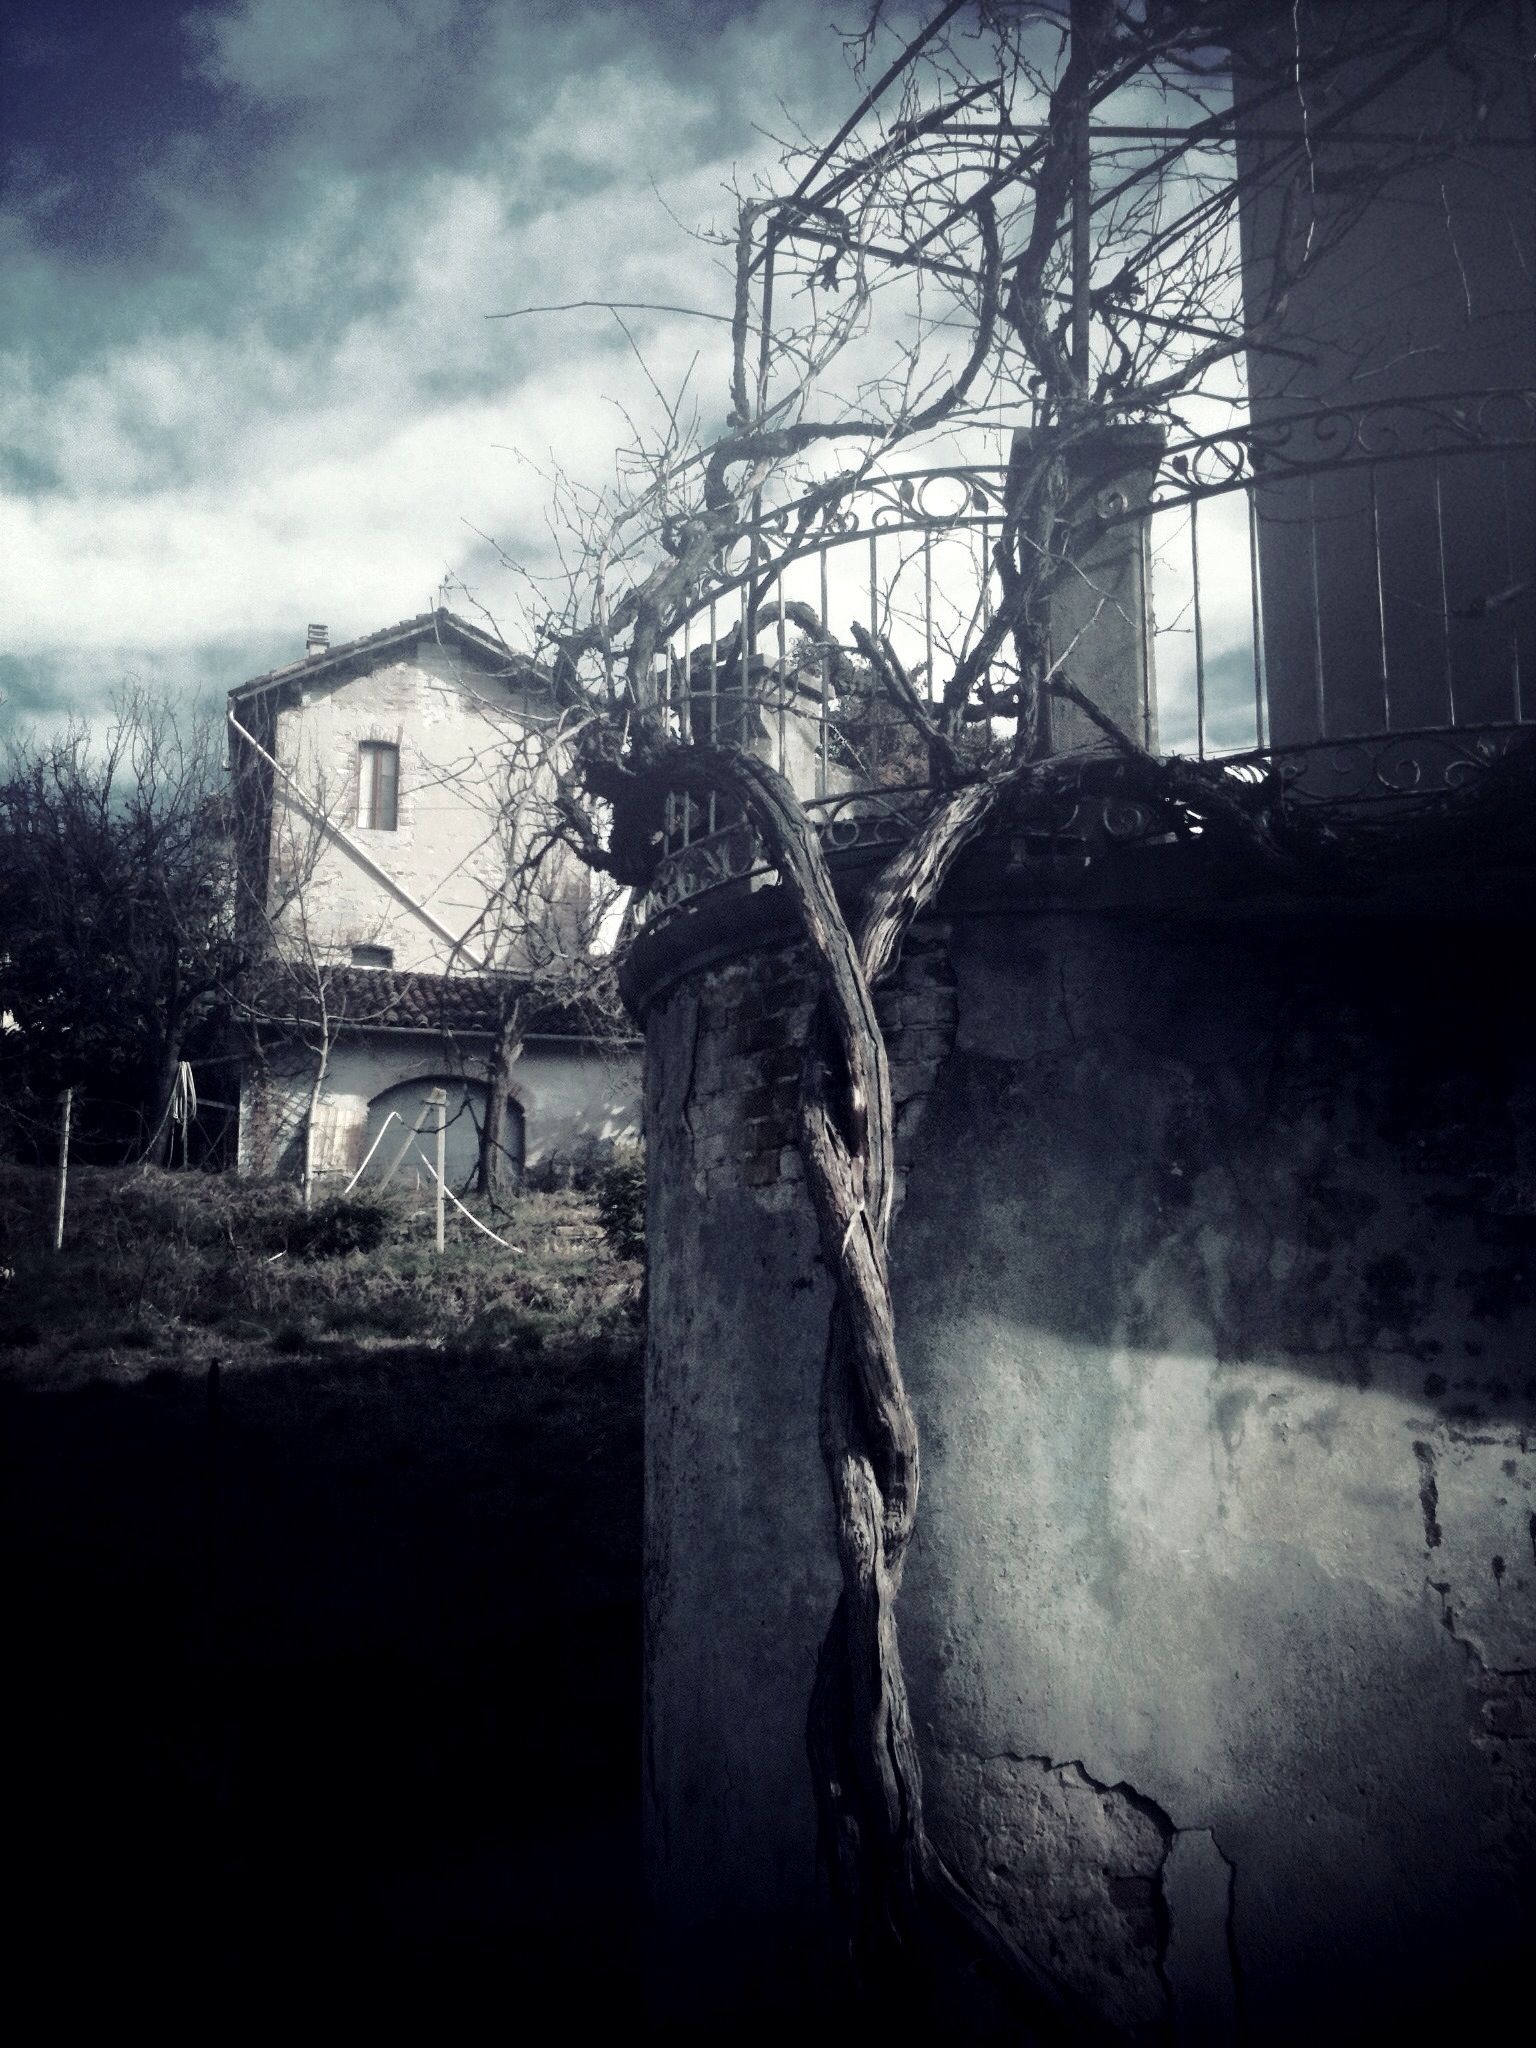 architecture, building exterior, built structure, bare tree, sky, tree, old, abandoned, cloud - sky, low angle view, building, house, weathered, obsolete, damaged, deterioration, branch, outdoors, no people, cloud